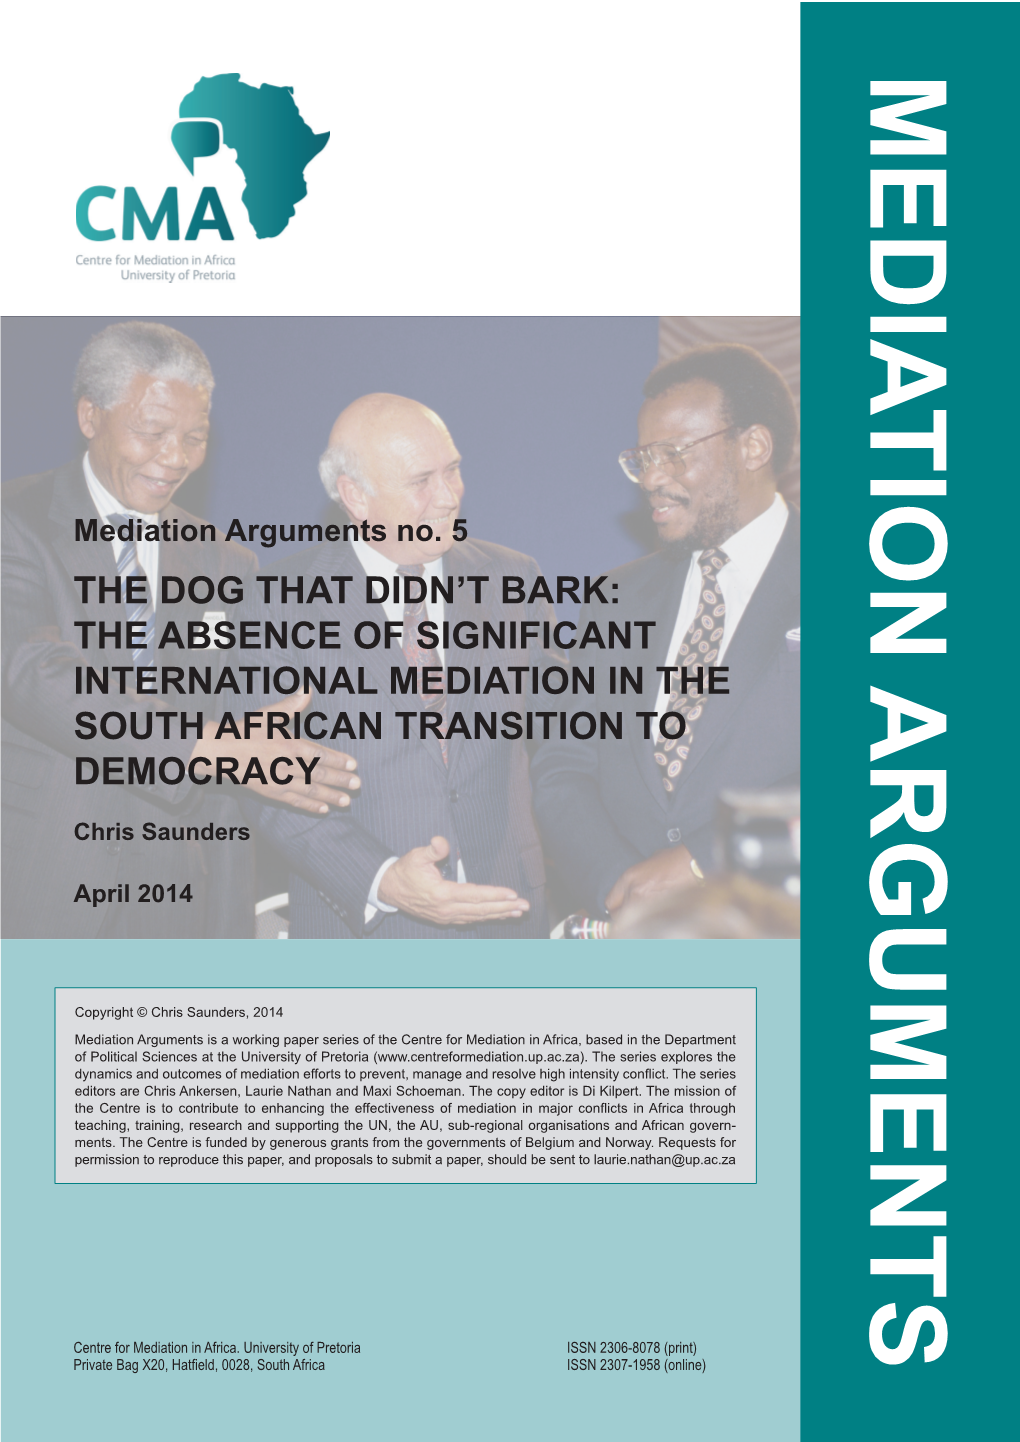 Mediation Arguments No. 5 the DOG THAT DIDN’T BARK: the ABSENCE of SIGNIFICANT INTERNATIONAL MEDIATION in the SOUTH AFRICAN TRANSITION to DEMOCRACY